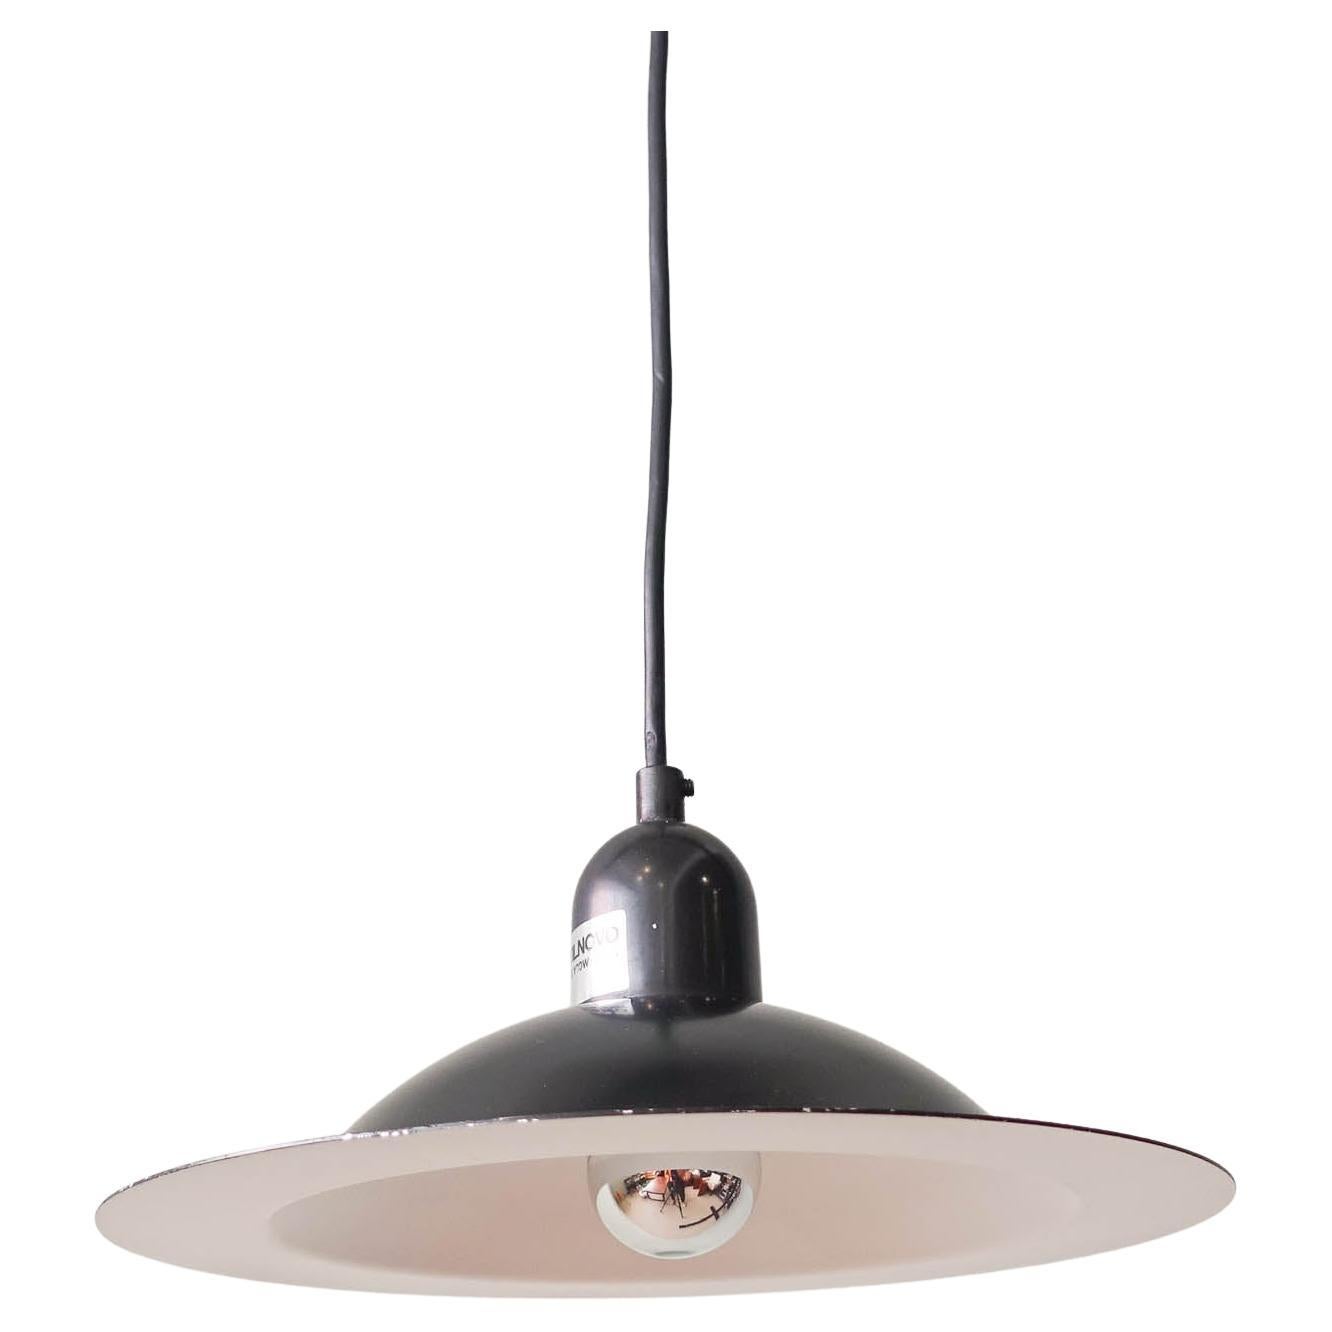 This pendant lamp, model Lampiatta, was designed by De Pas, D’Urbino, & Lomazzi in 1971 for Stilnovo. It is made of metal, painted black outside and white inside. With the original label from the manufacture. In original and good vintage condition.